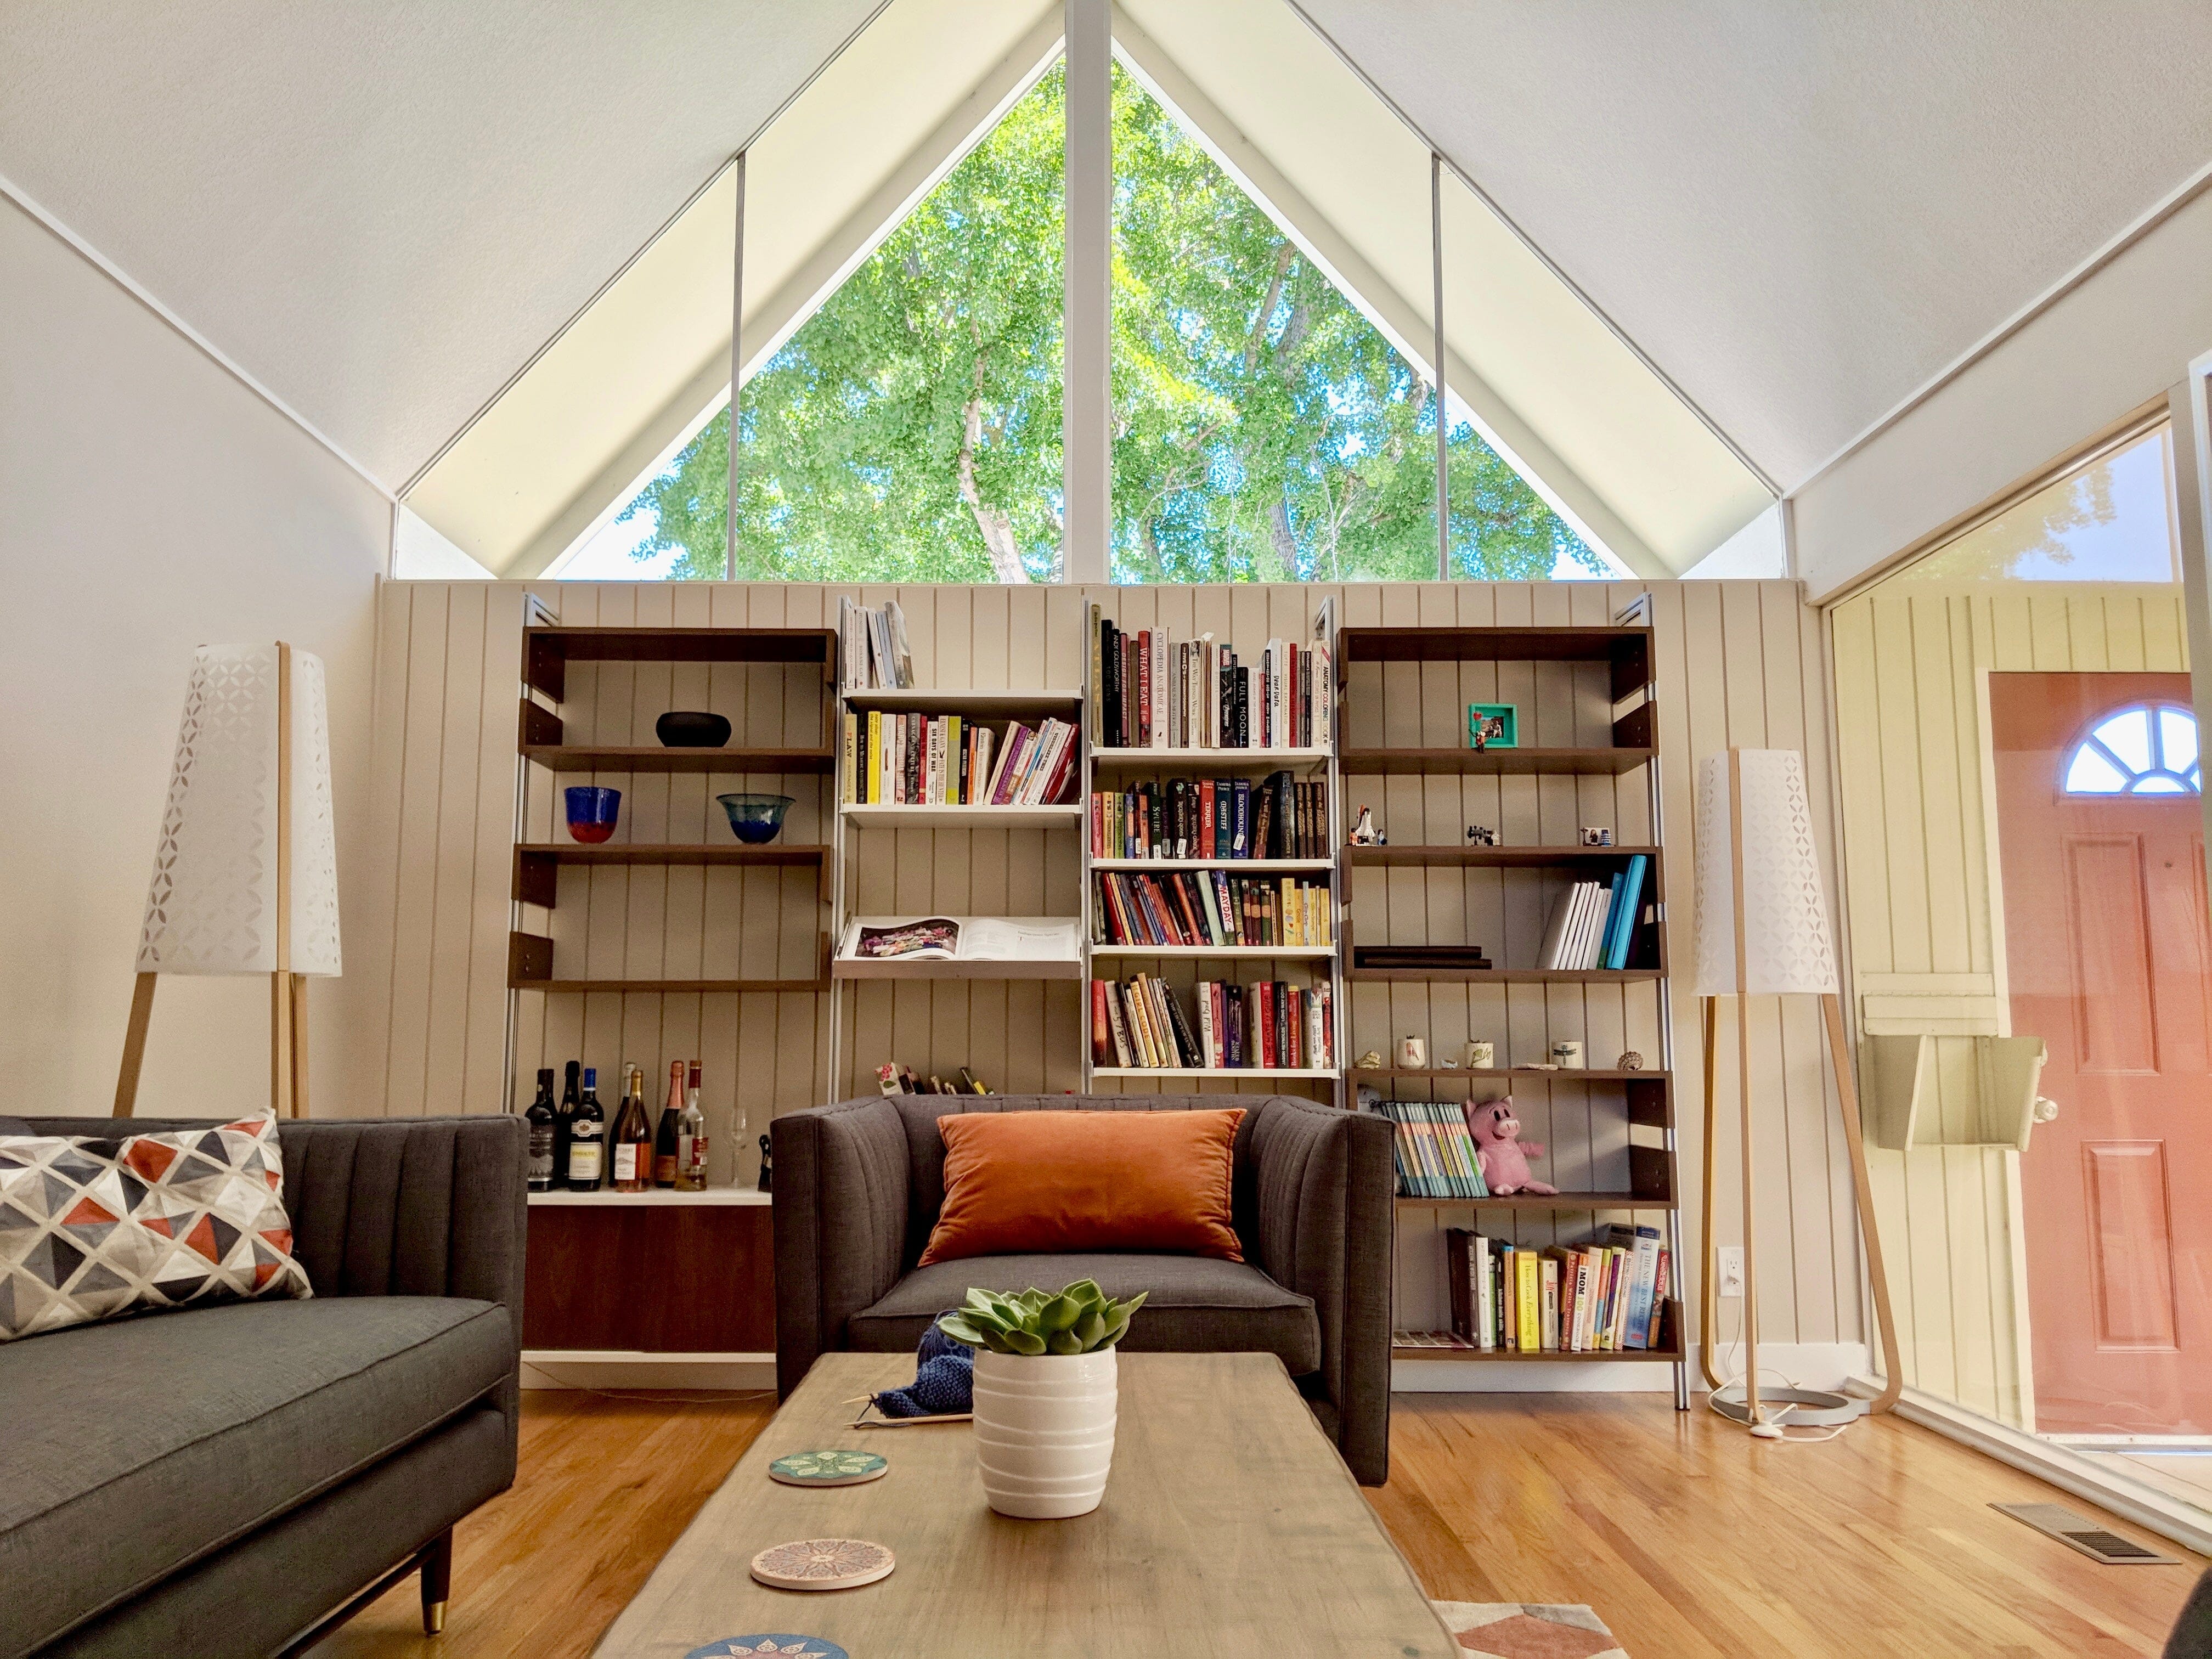 Tips to maximize space in an A-frame house with ideas including shelving and storage.